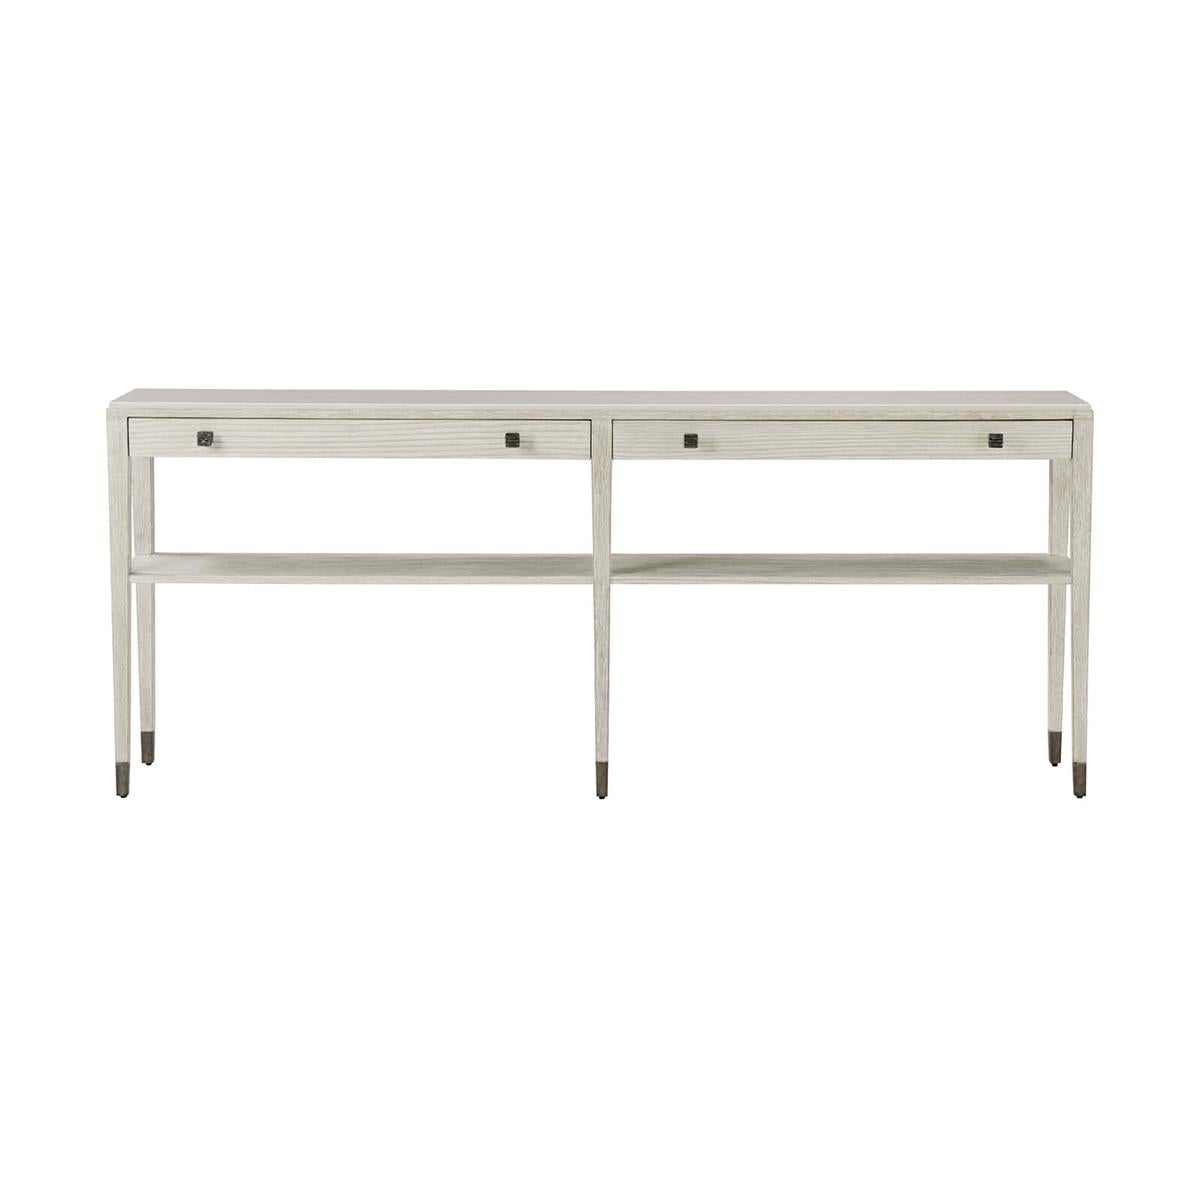 Coastal long console table with a white limestone top, wire-brushed cerused pine in our Sea Salt finish with two long drawers accented with four organic ribbed metal knobs in our dark sterling finish and a lower display shelf.

Dimensions: 84